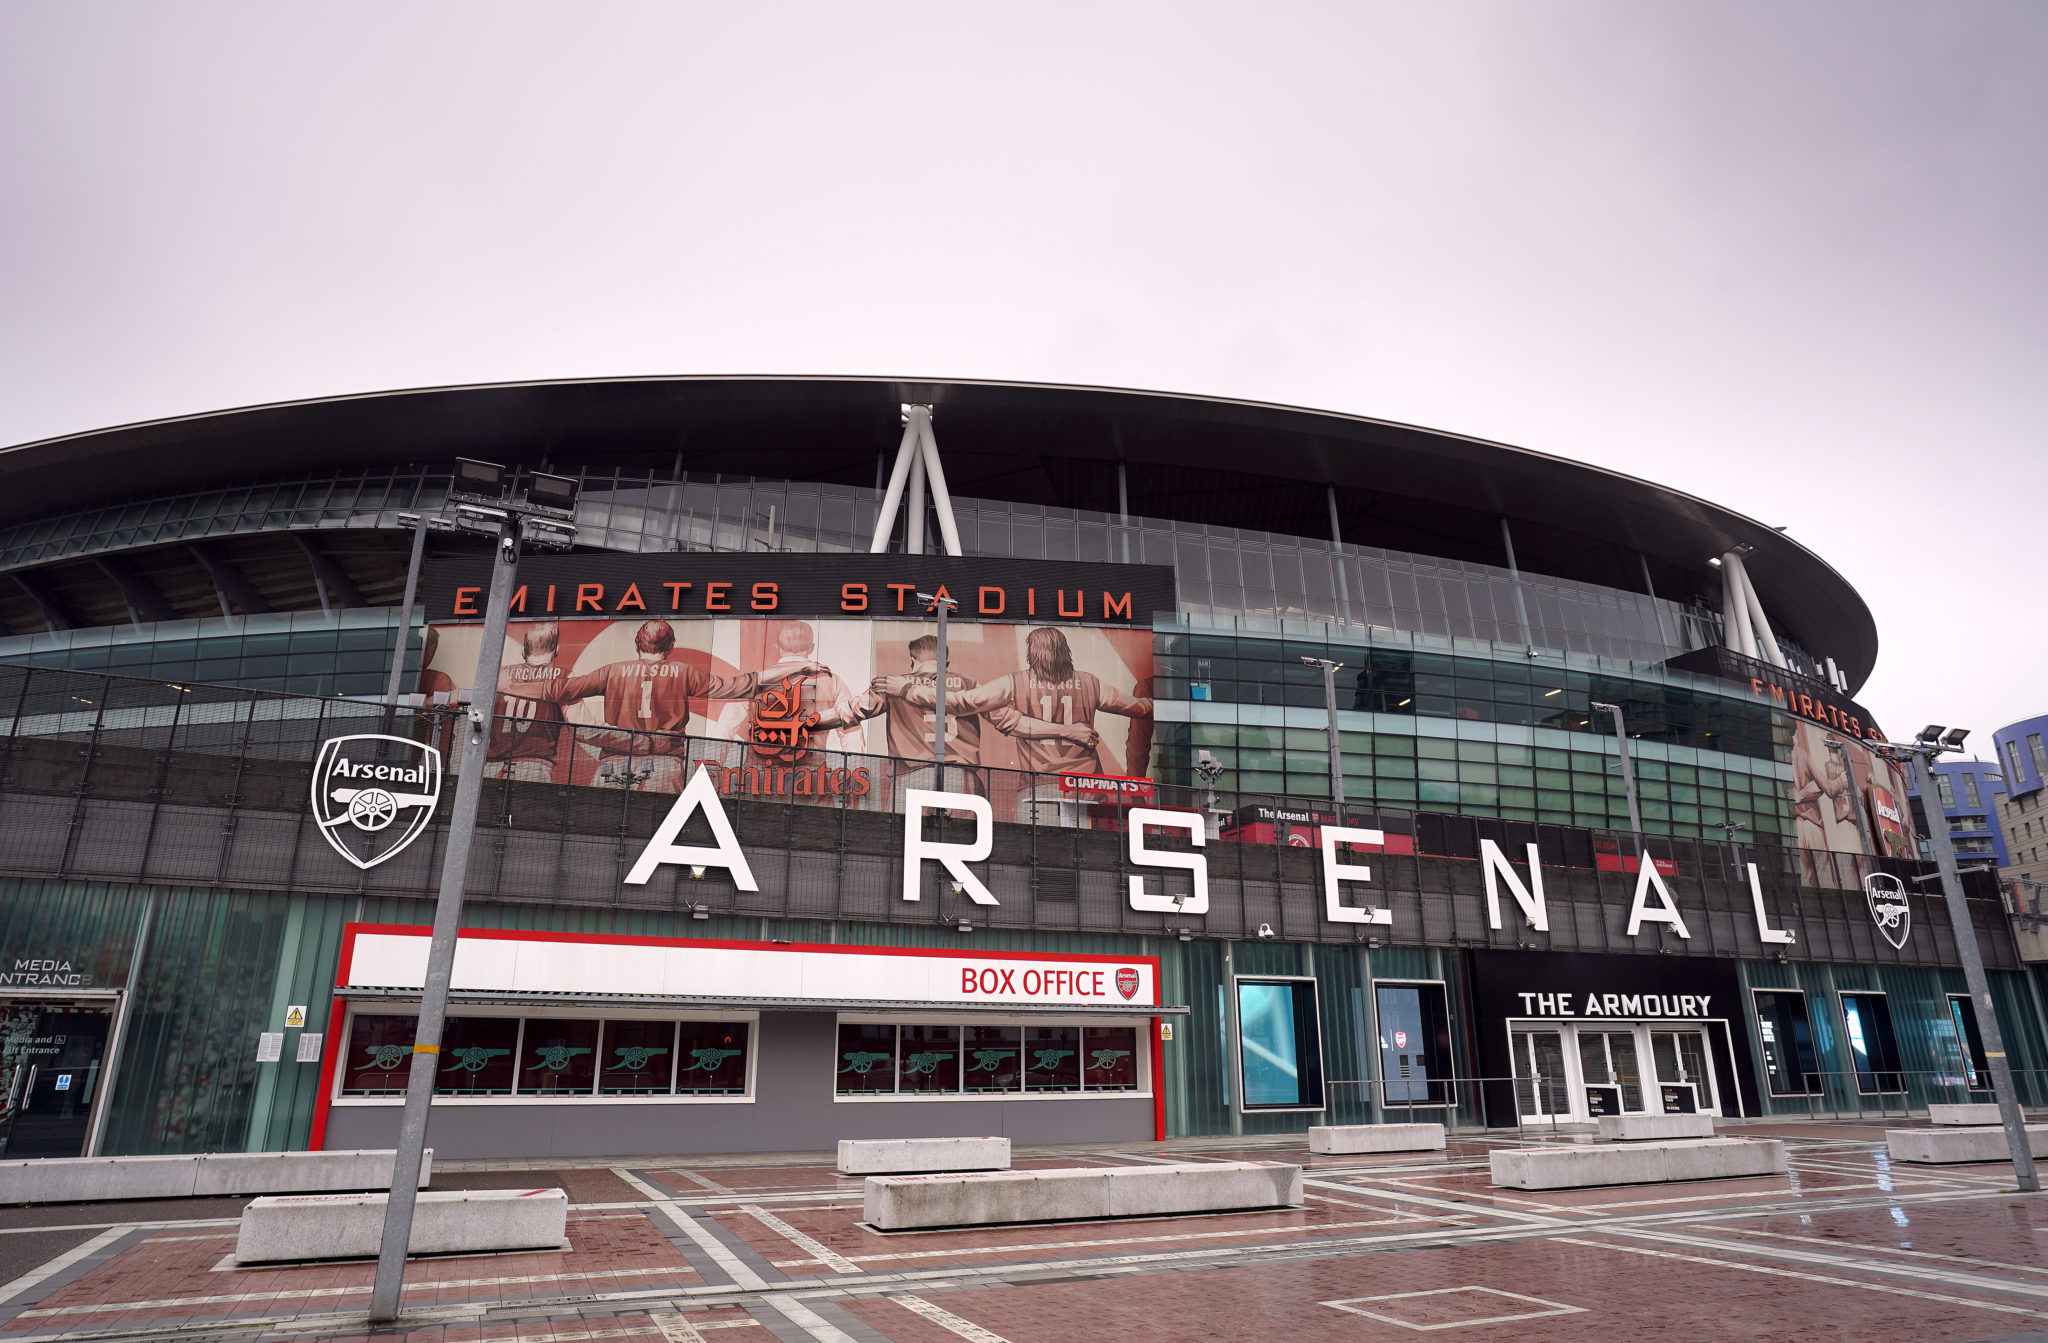 A view from the front of the Emirates Stadium, London